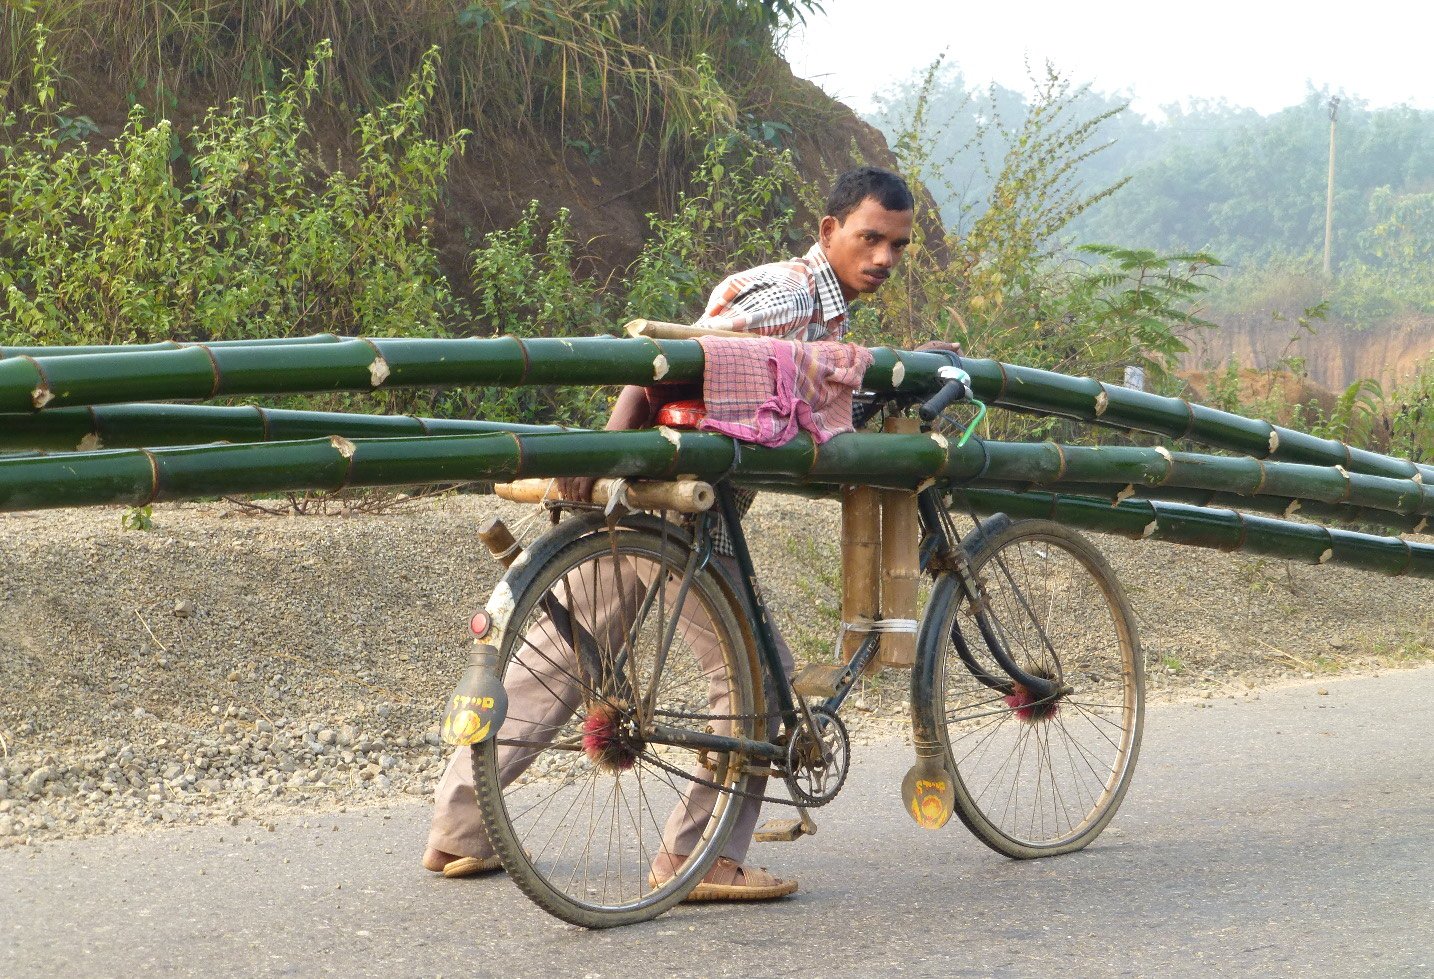 Ratan Biswas carries five bamboos, each 40-45 feet in length, balanced on and tied to his bicycle. 